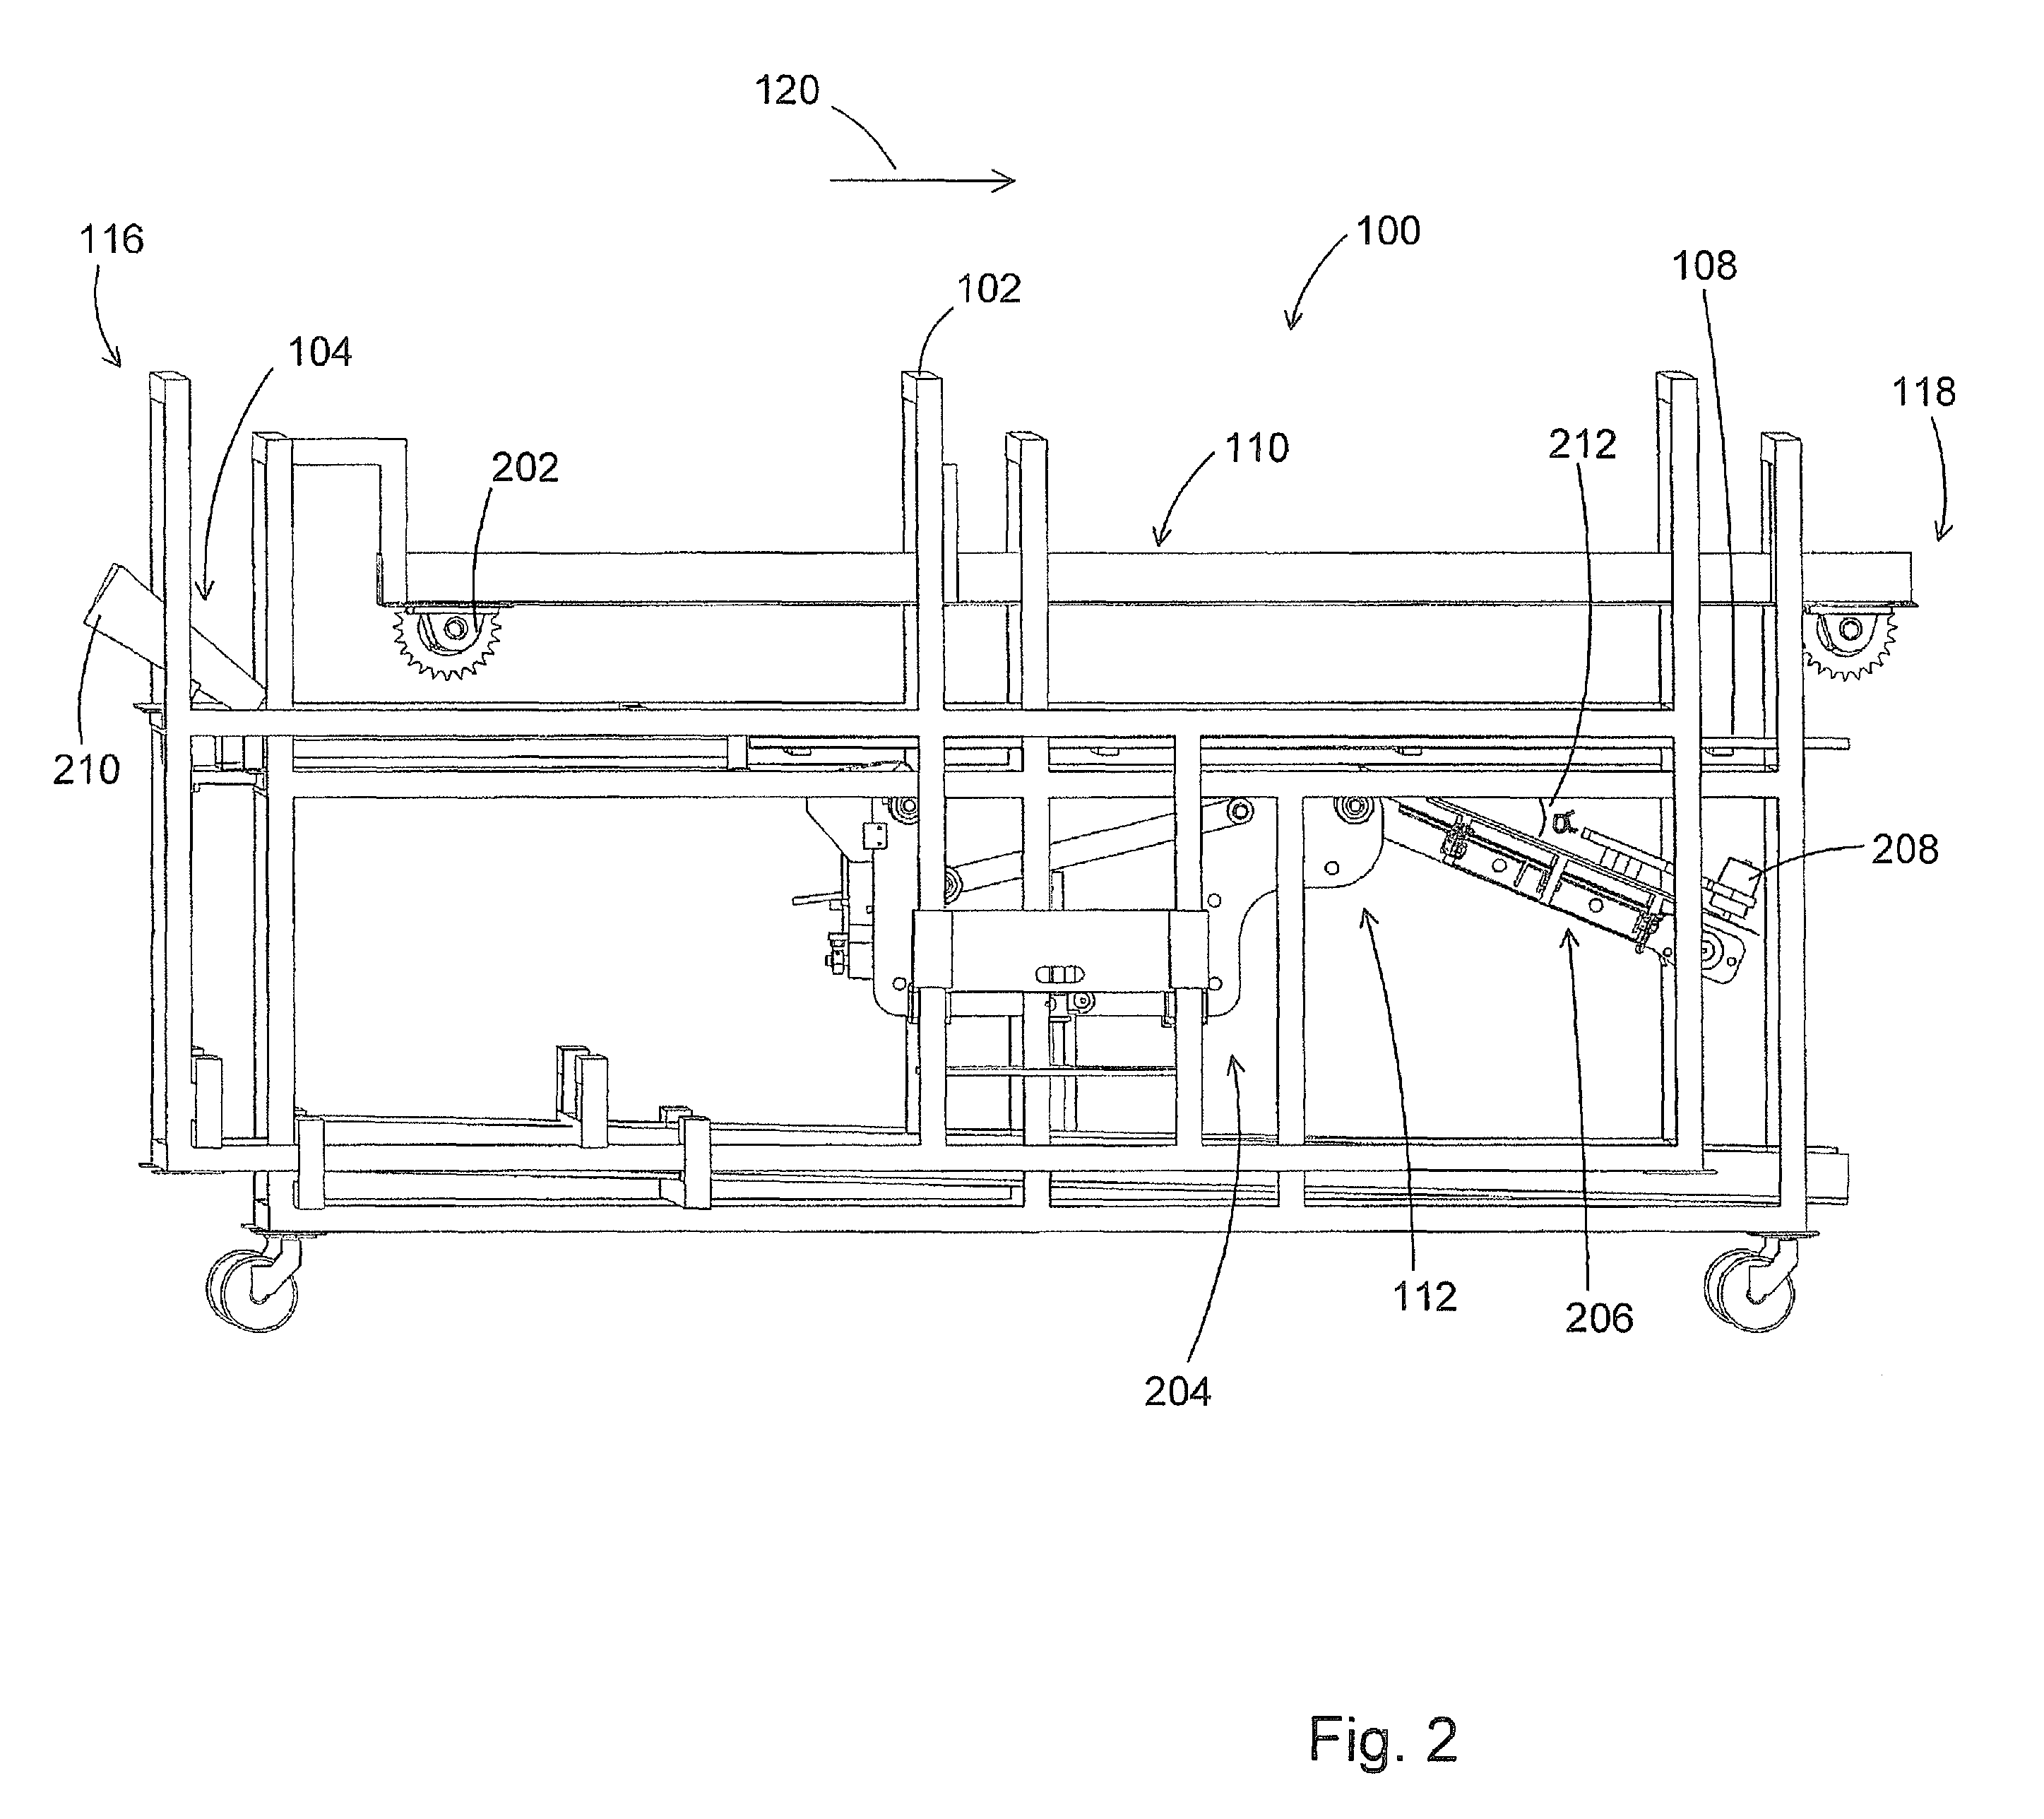 Method and apparatus for harvesting livers and hearts